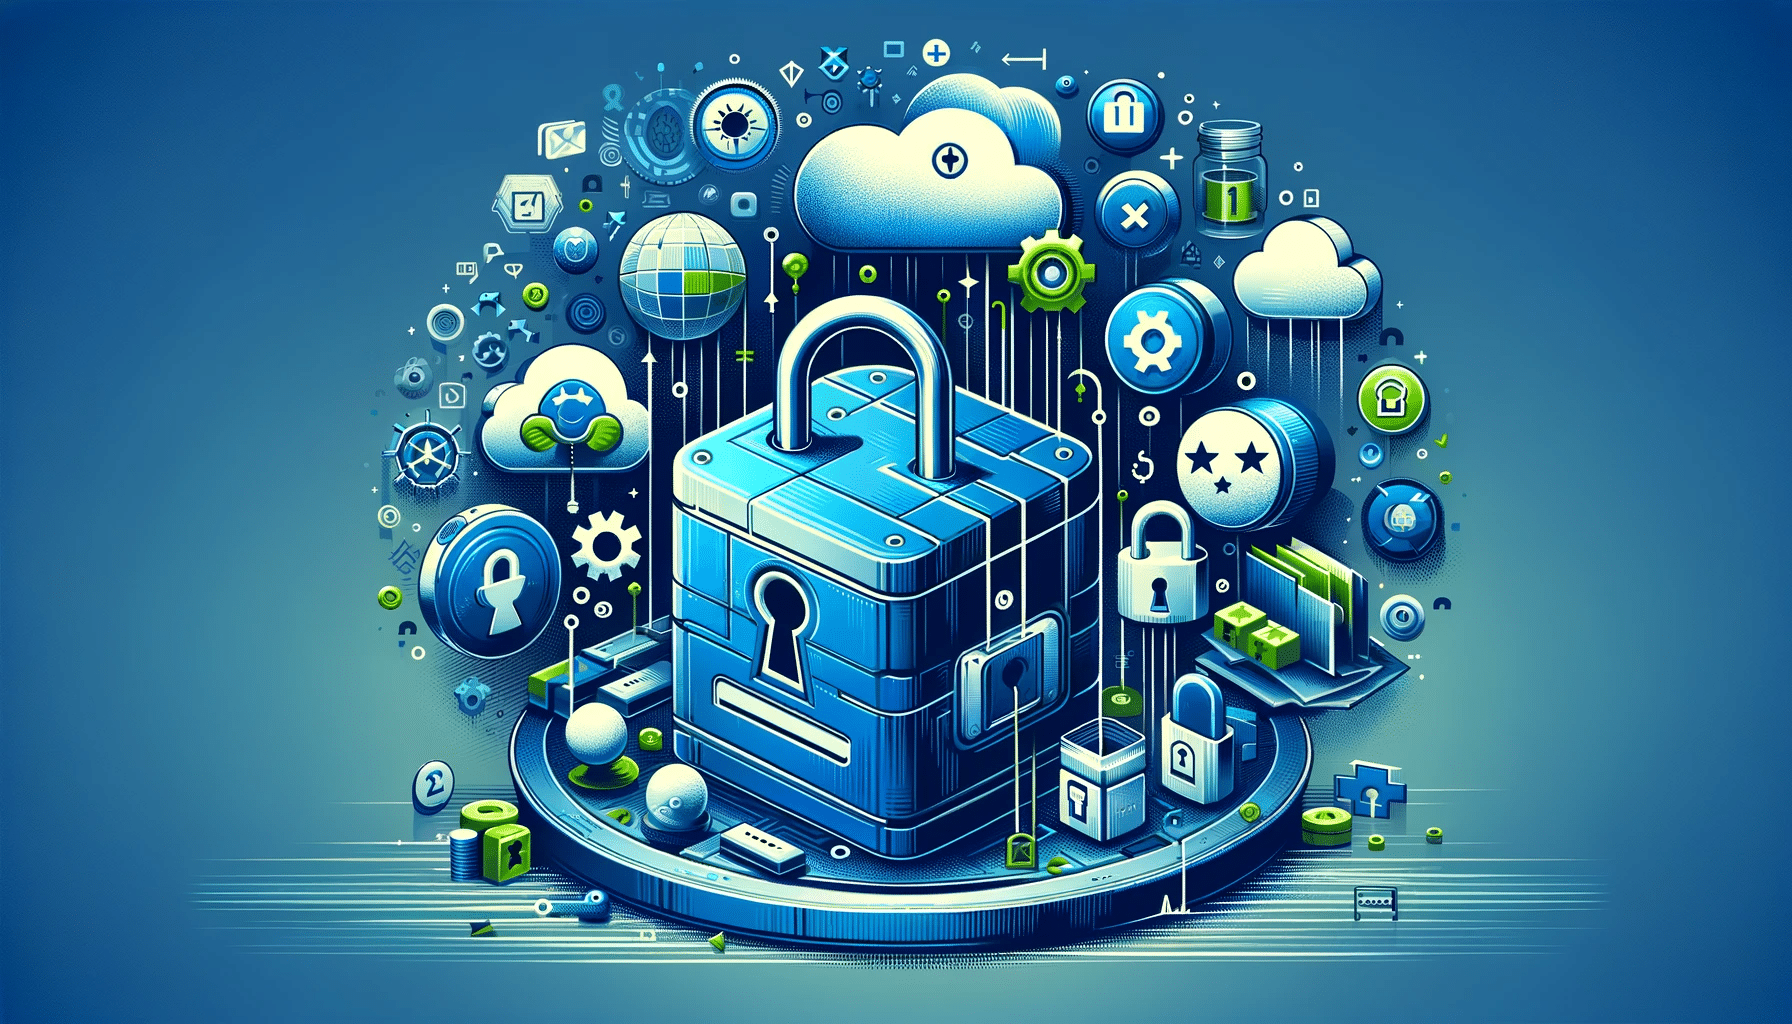 This is a stylized digital illustration featuring a central 3D padlock surrounded by various technology and security icons; it represents cybersecurity and data protection concepts.